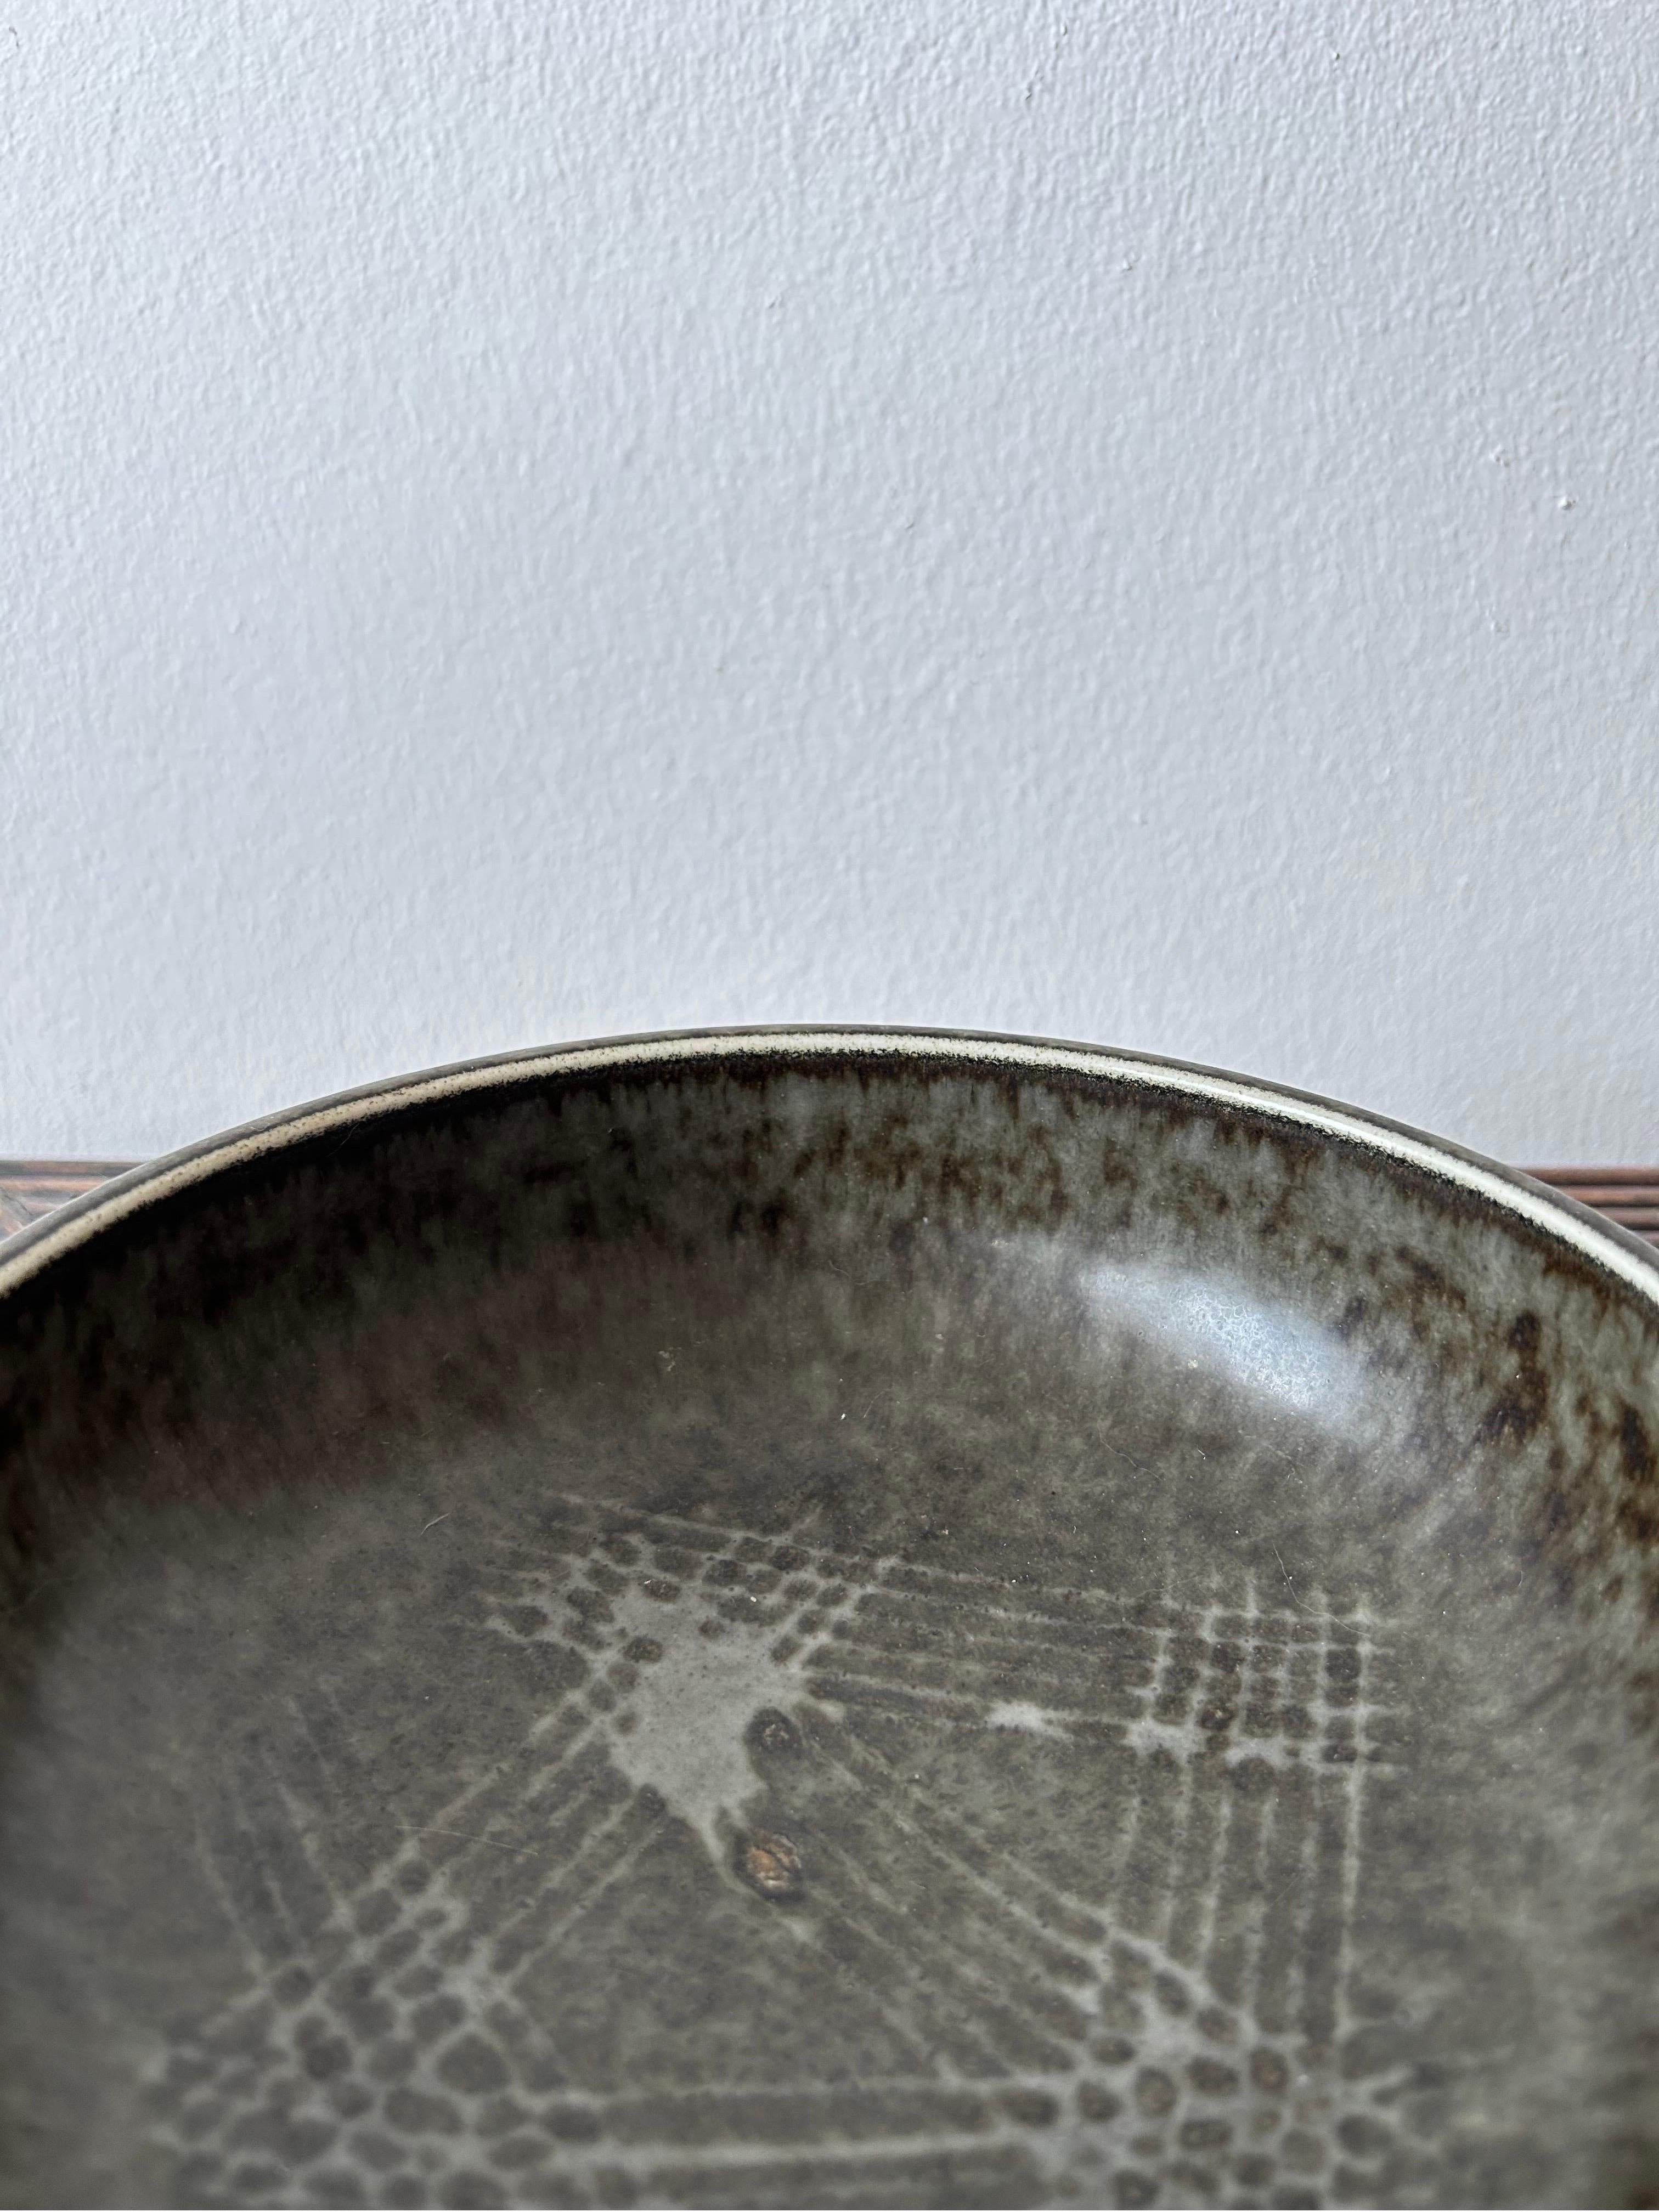 Beautiful ceramic bowl by Swedish artist Carl Harry Stålhane made at Rörstrand atelje in the 1950’s.

The bowl has a beautiful glaze which gives a beautiful structure to the bowl.
The glaze is a mixture of dark gray, brown and black which is a